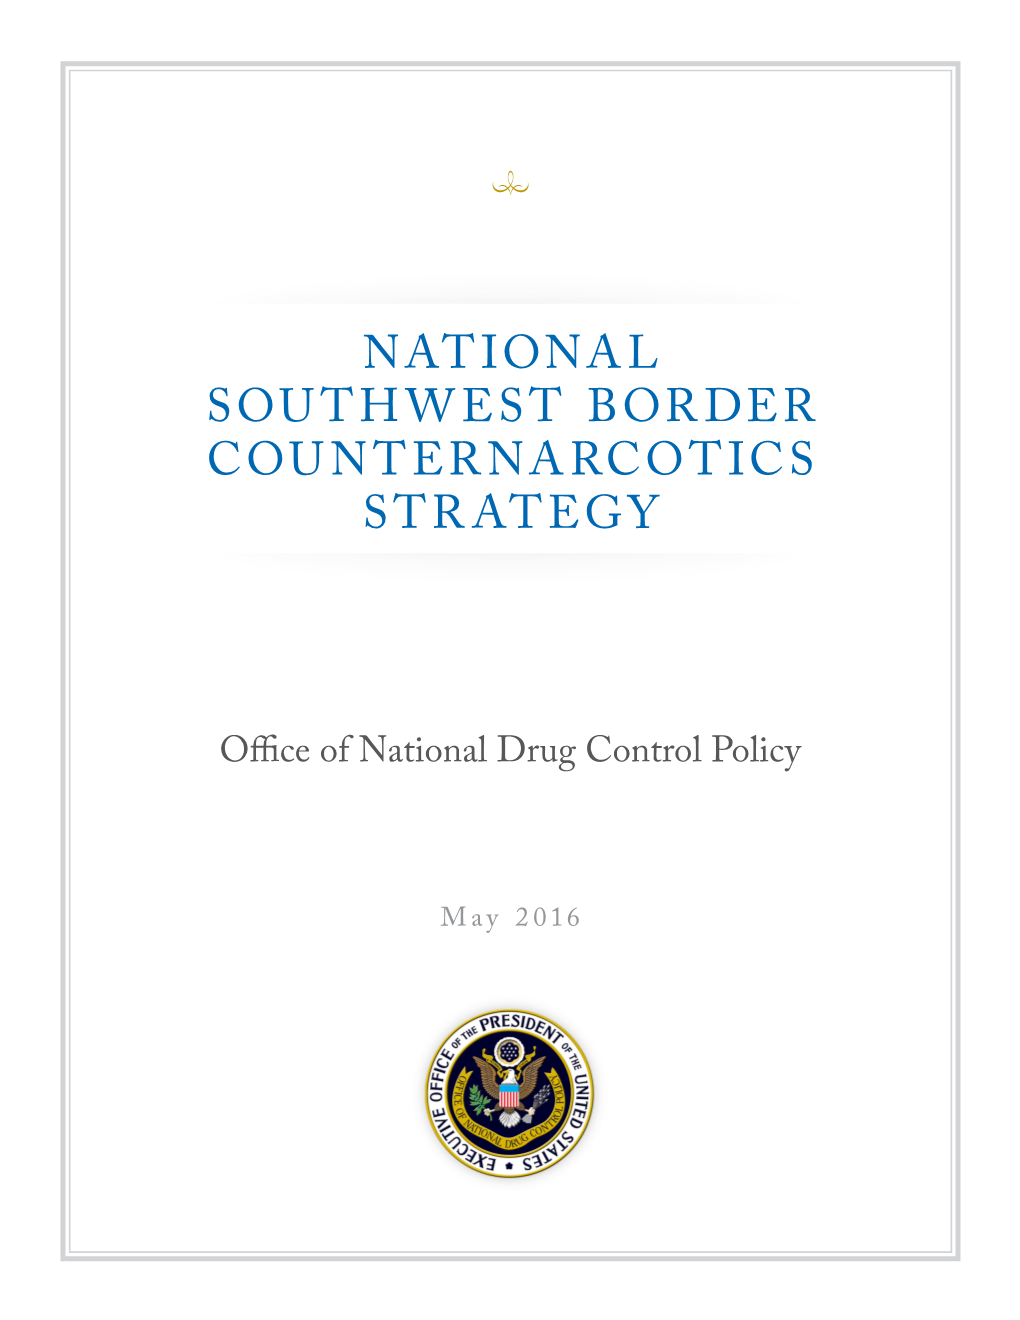 Read the Full 2016 National Southwest Border Counternarcotics Strategy